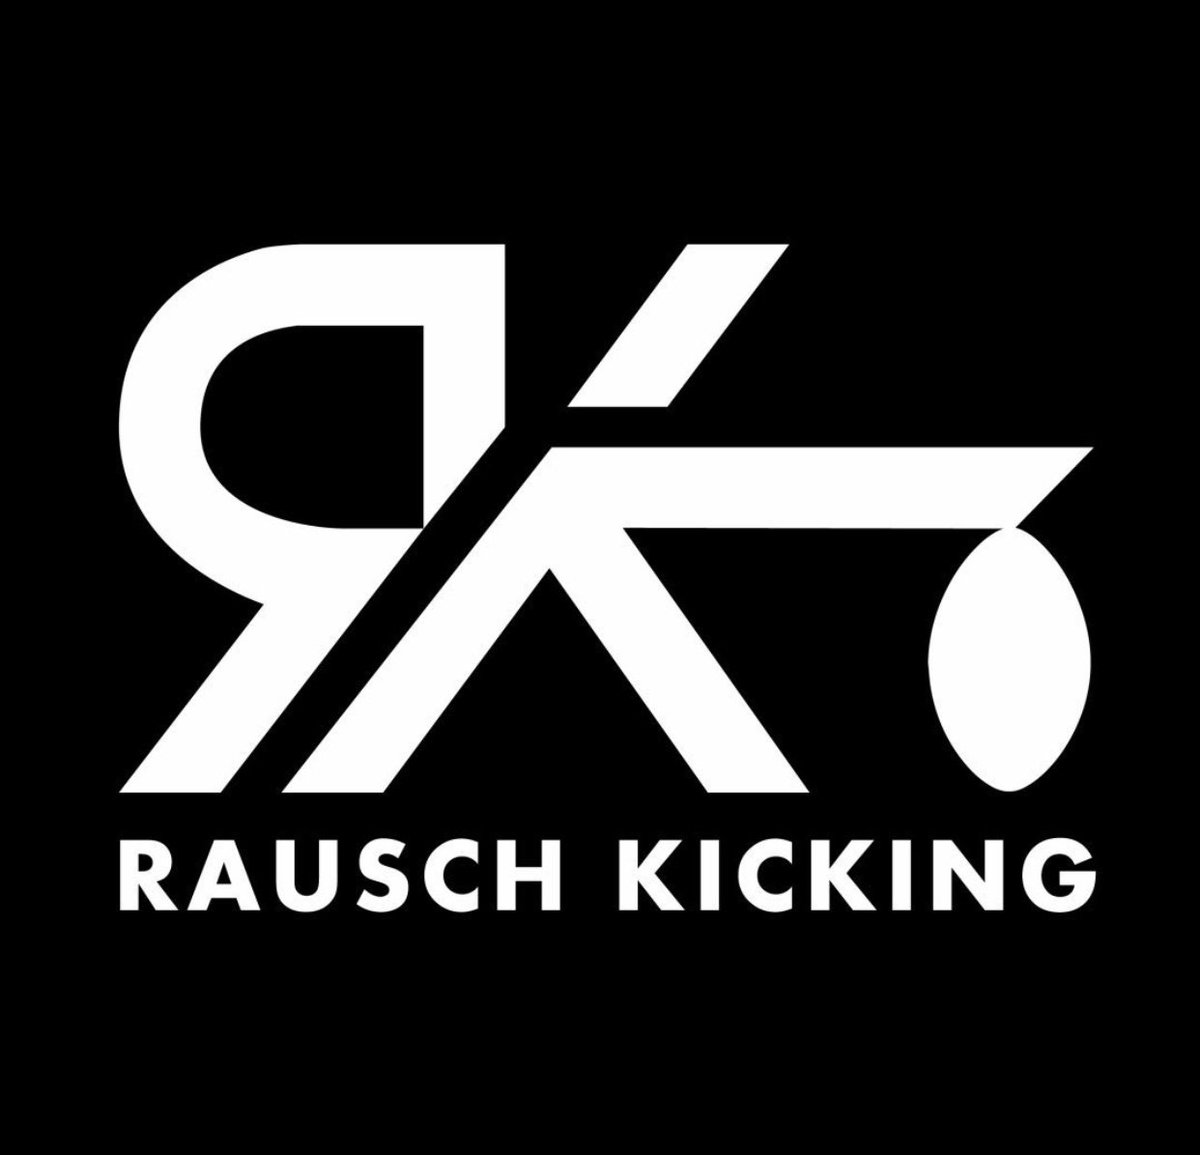 🚨Saturday Group Schedule🚨 
-9am: Hs specialists (Dm to reserve spot)
-10am: College/Pro 
*Pk/P/LS
Location: Saguaro Hs, Scottsdale
#rauschkicking #kickingcamps #kickers #punters #longsnappers